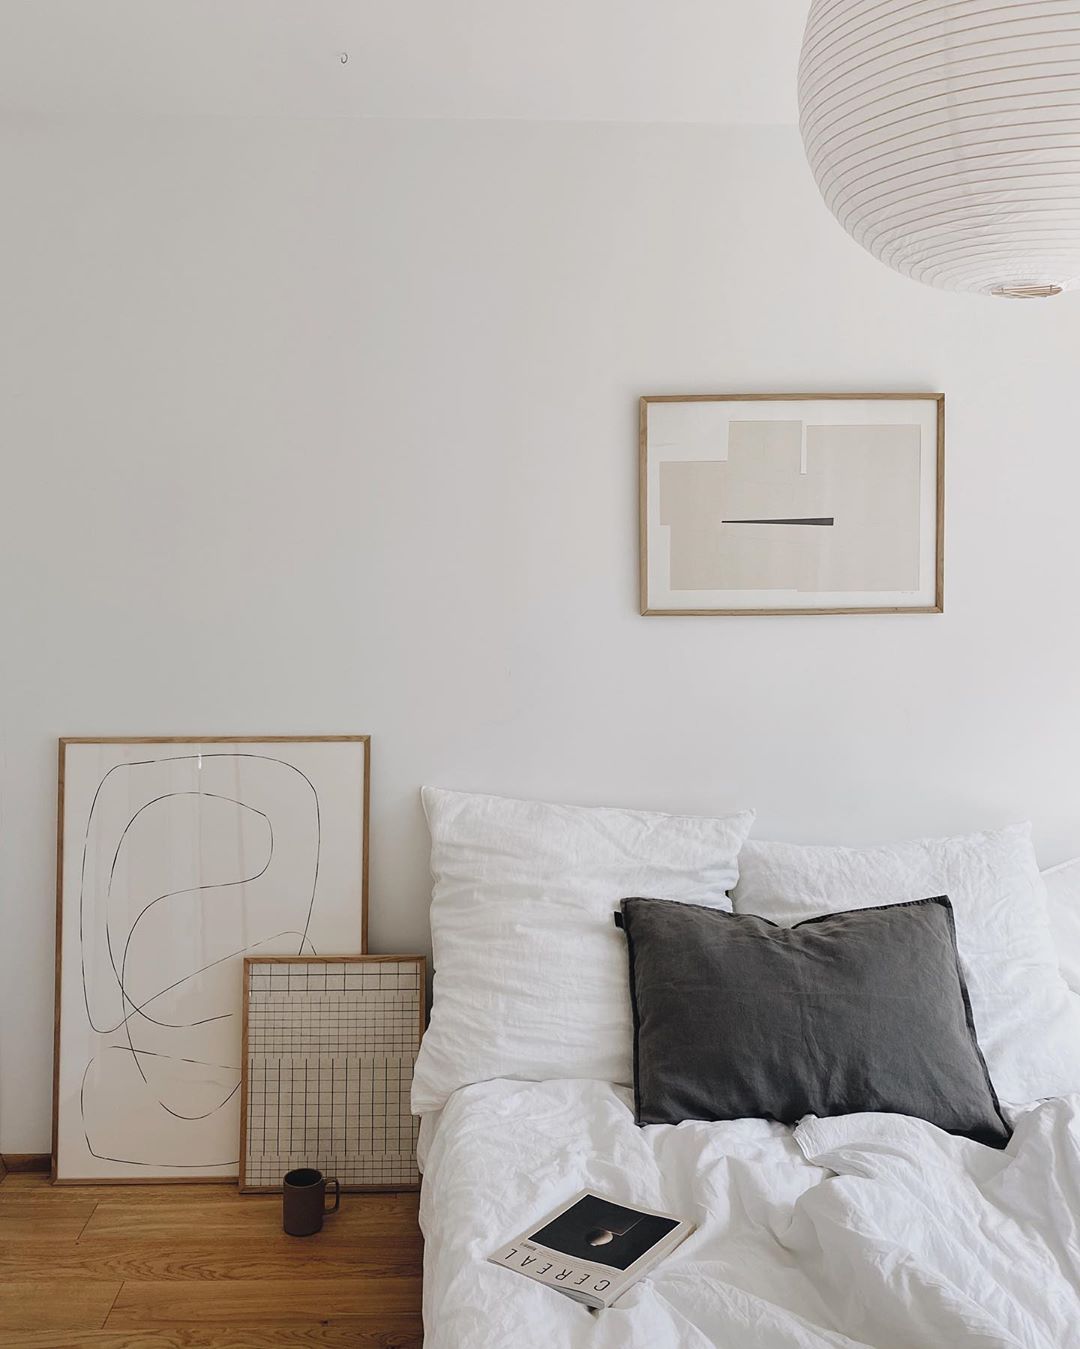 Cute and simple Dorm Room Ideas For College Students! Find the perfect dorm decor that fits your minimalist style. Get the best dorm room inspo and create the college bedroom of your dreams #dormroom #minimalistdorm #dormroomideas